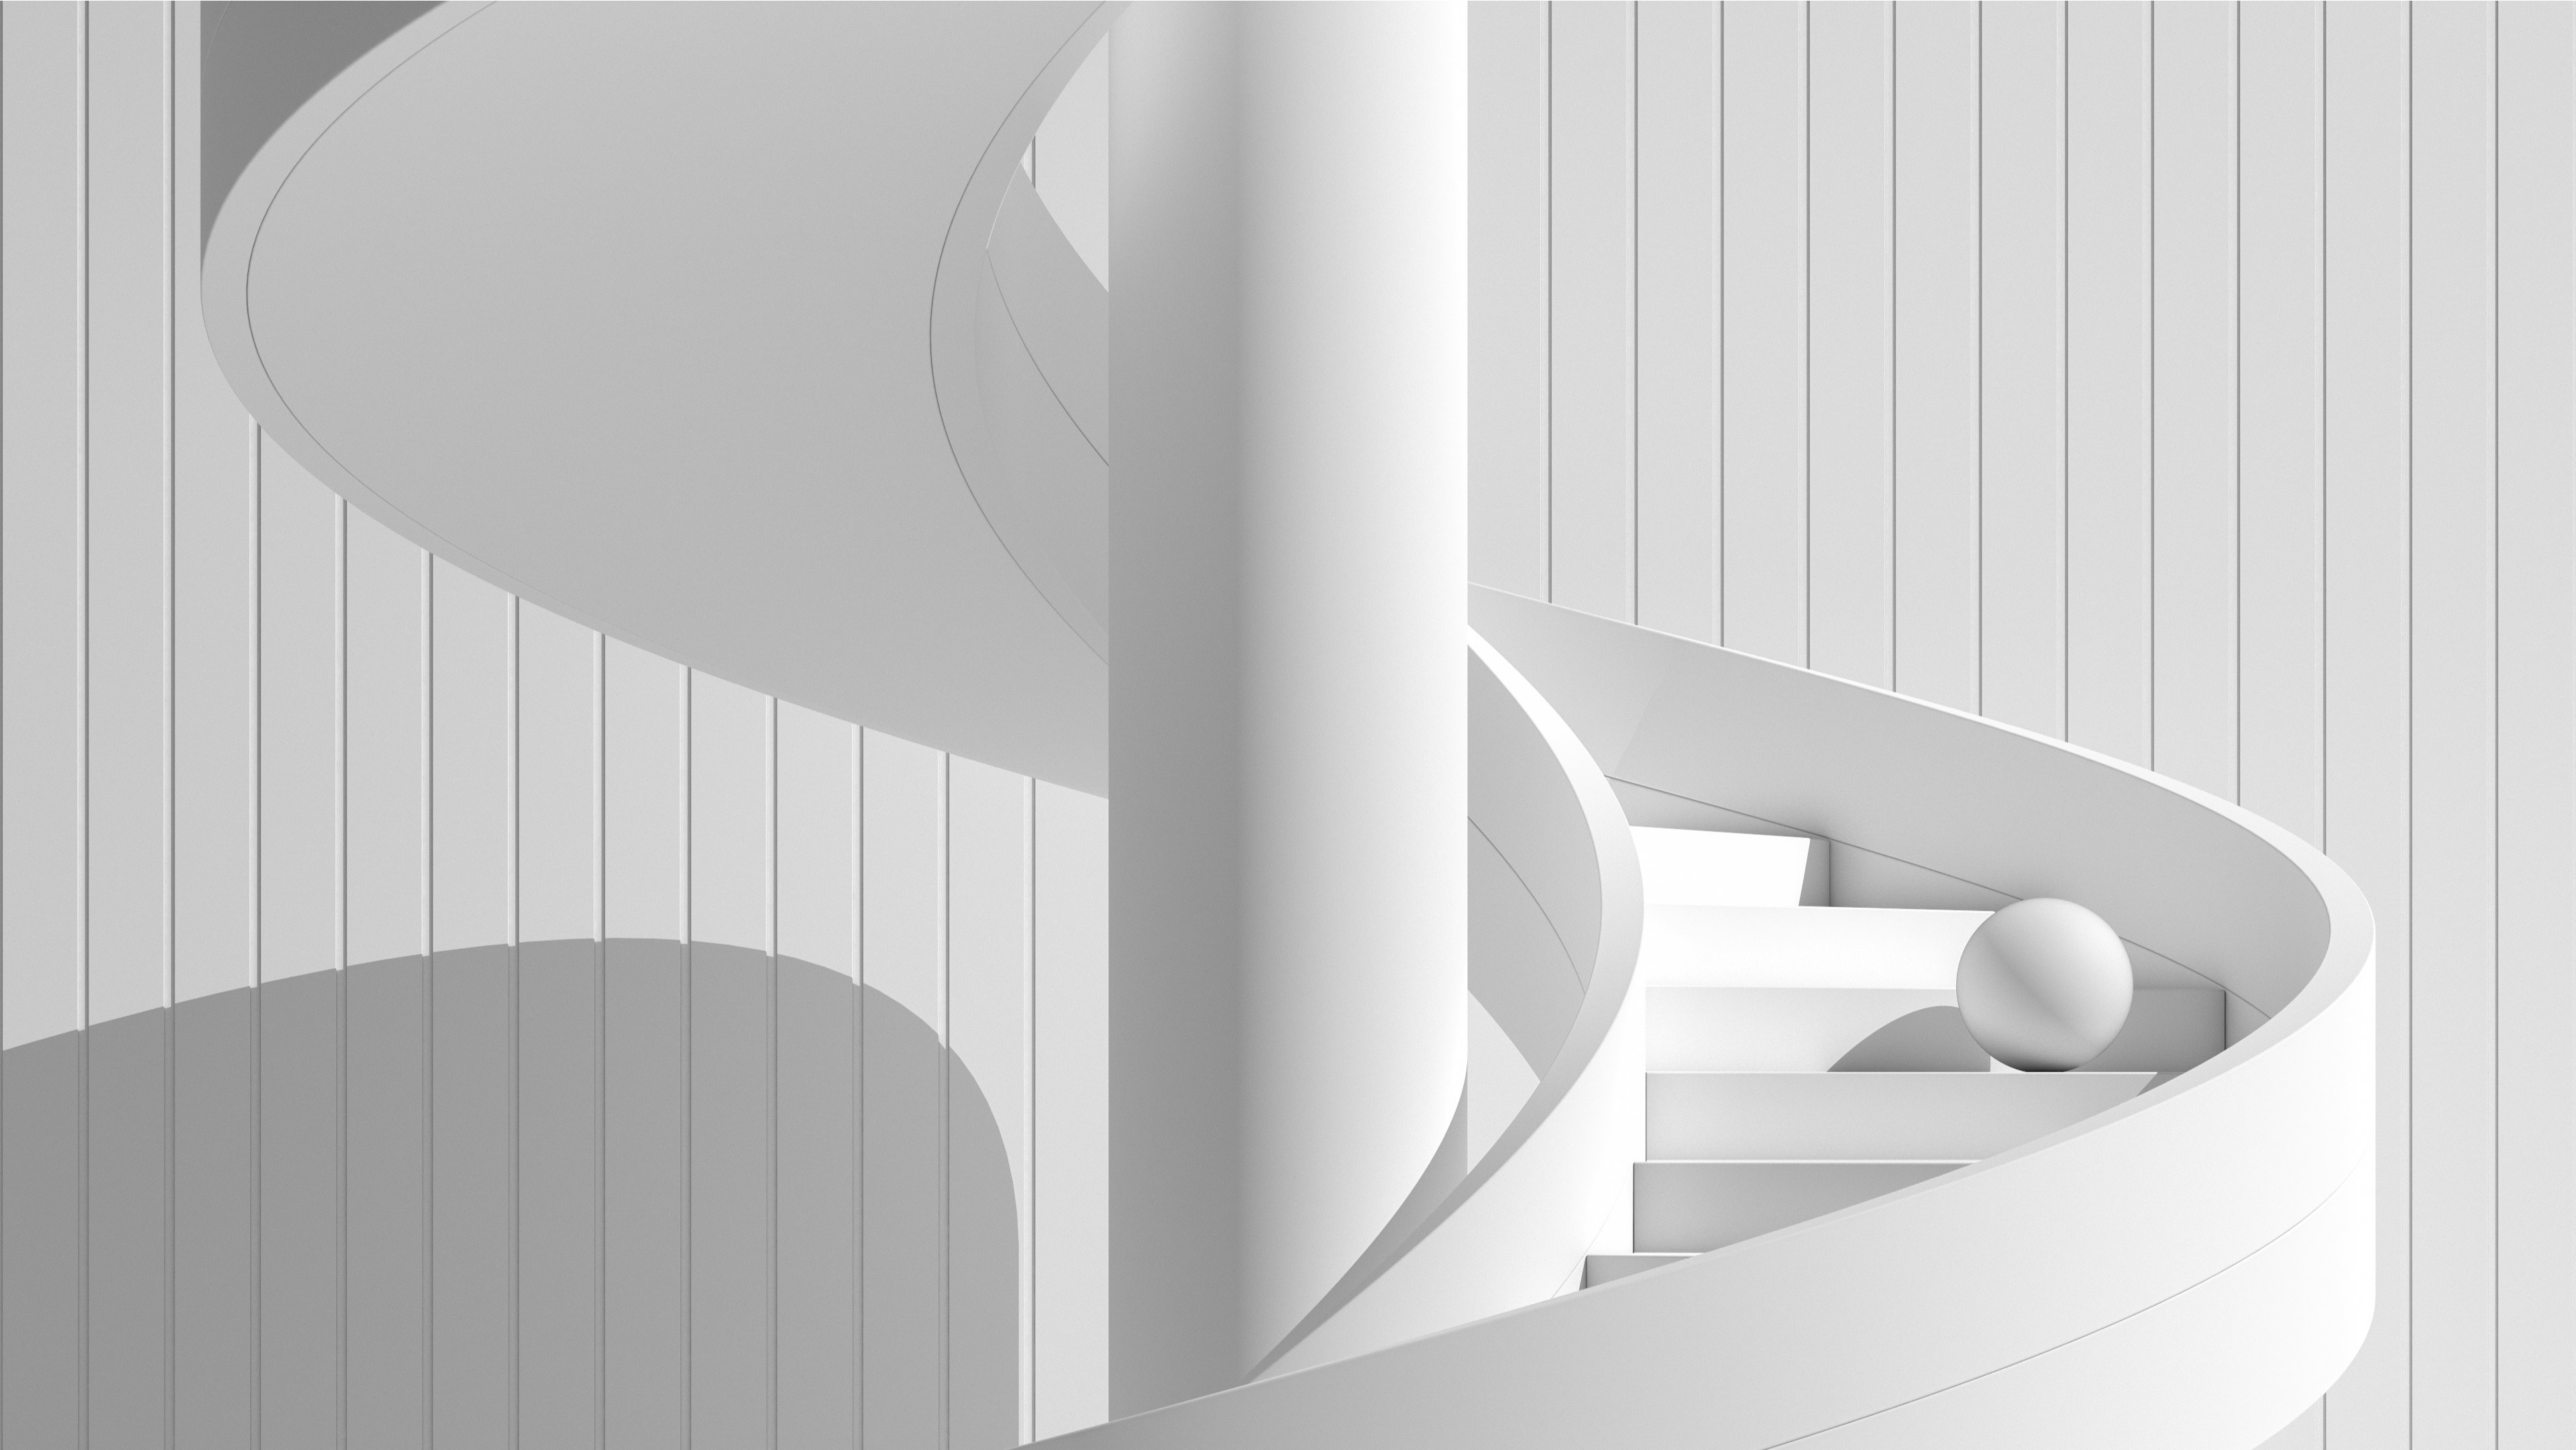 A minimalist, monochromatic image featuring a modern spiral staircase with a smooth, white finish. The background consists of vertical white panels, creating a clean and sophisticated aesthetic. A single spherical object rests on one of the steps, adding a subtle focal point to the composition. The overall design conveys elegance and simplicity.